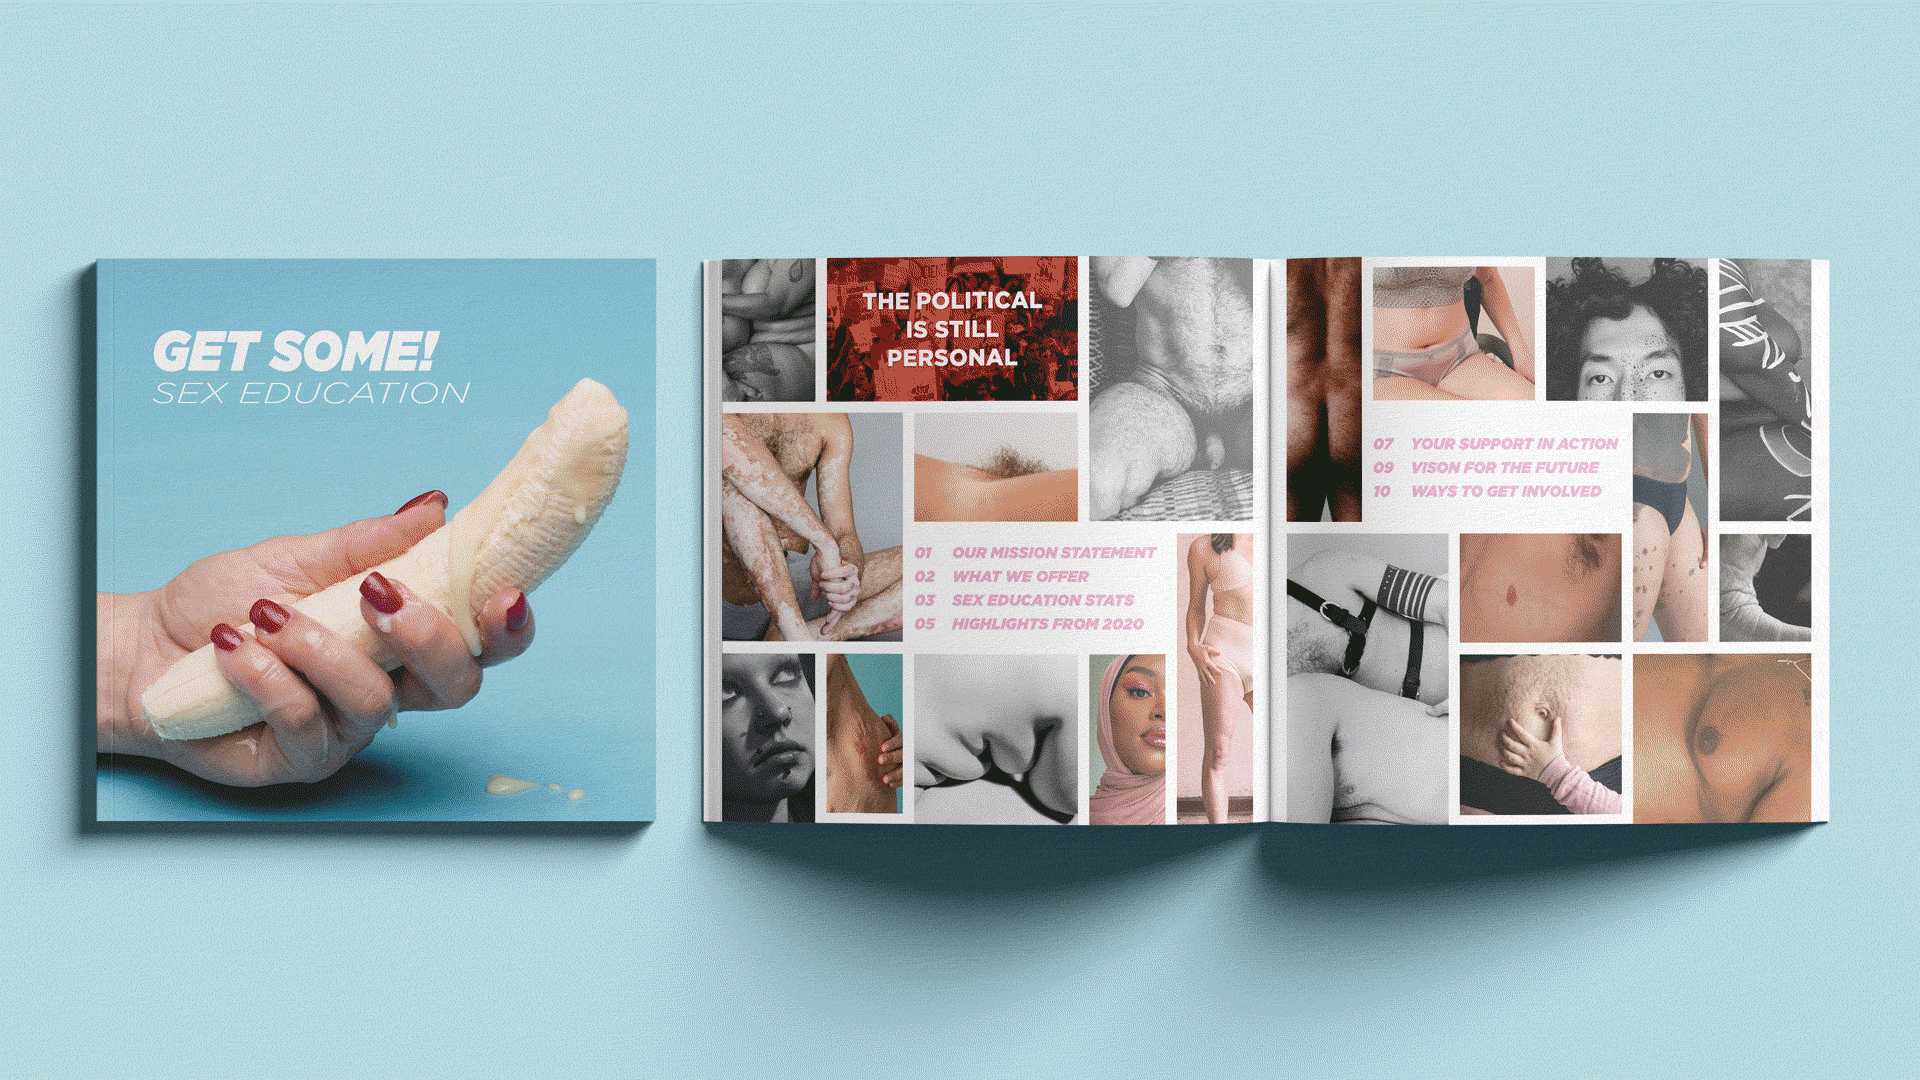 Alternating images of spreads and cover design for an annual report on sex education.